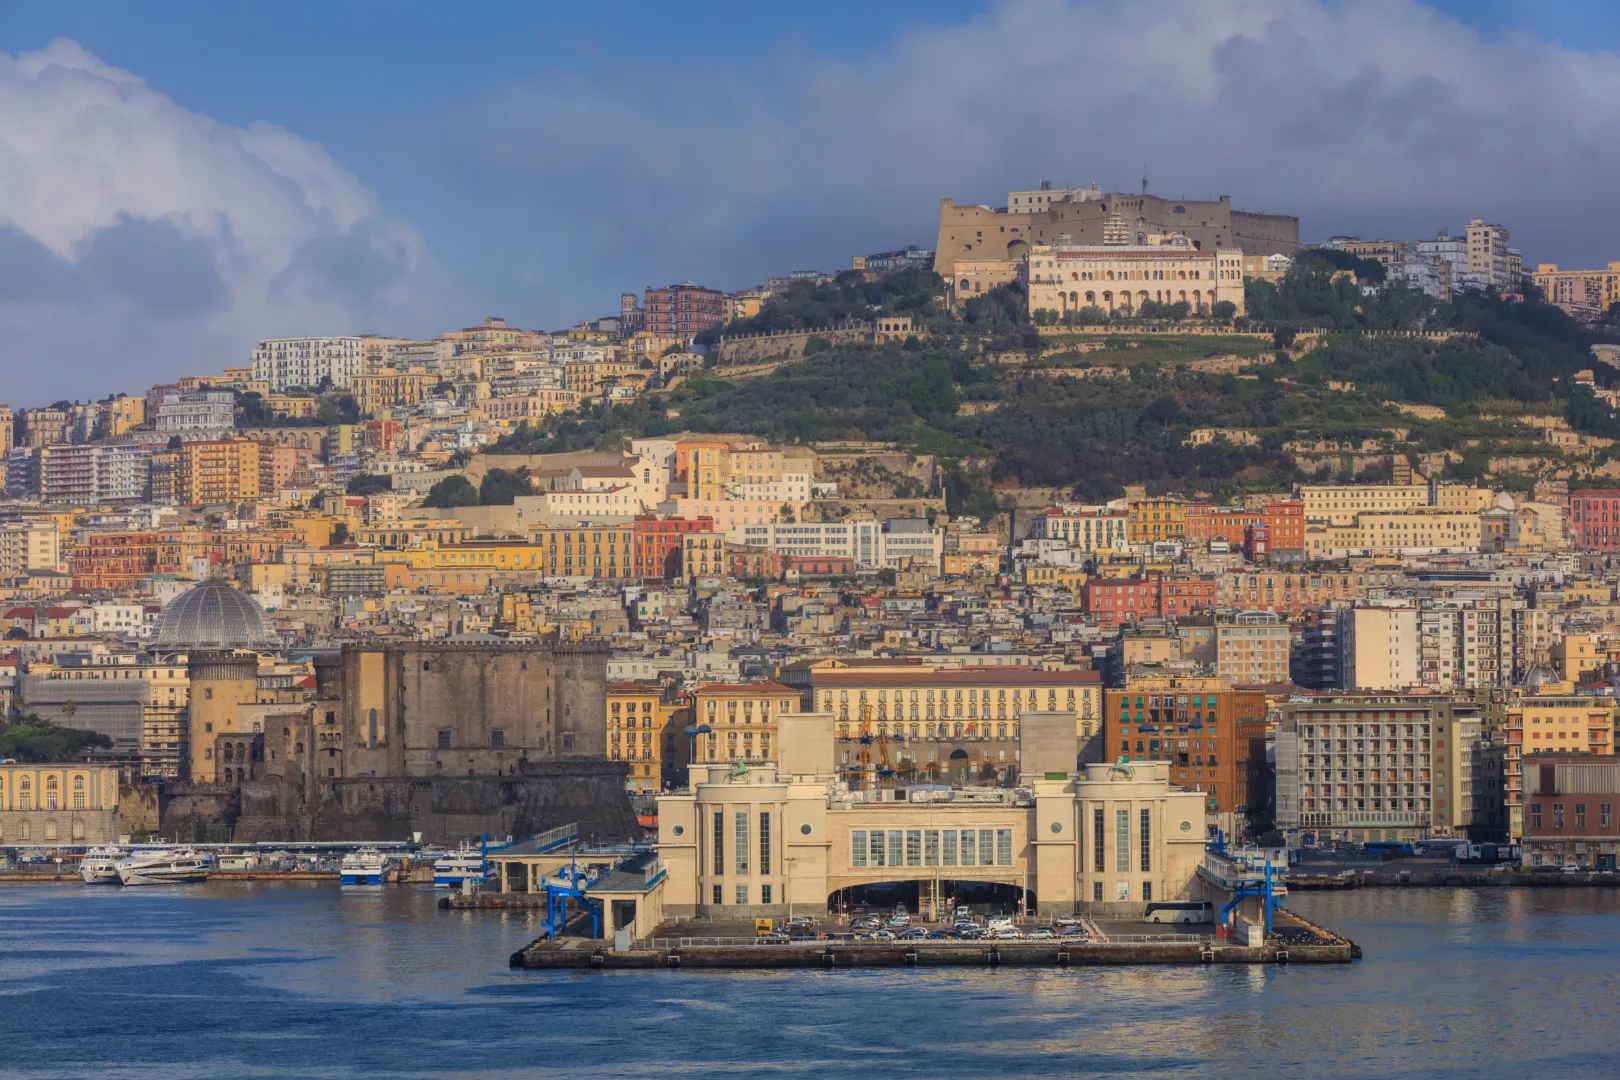 Title: Discover the Top Touristic Places in Naples | Visit Naples Now Alt: A beautiful view of one of the top touristic places in Naples Description: Explore the best touristic places in Naples and plan your trip to this beautiful city. From historic landmarks to stunning coastal views, Naples has it all. Book your trip now!